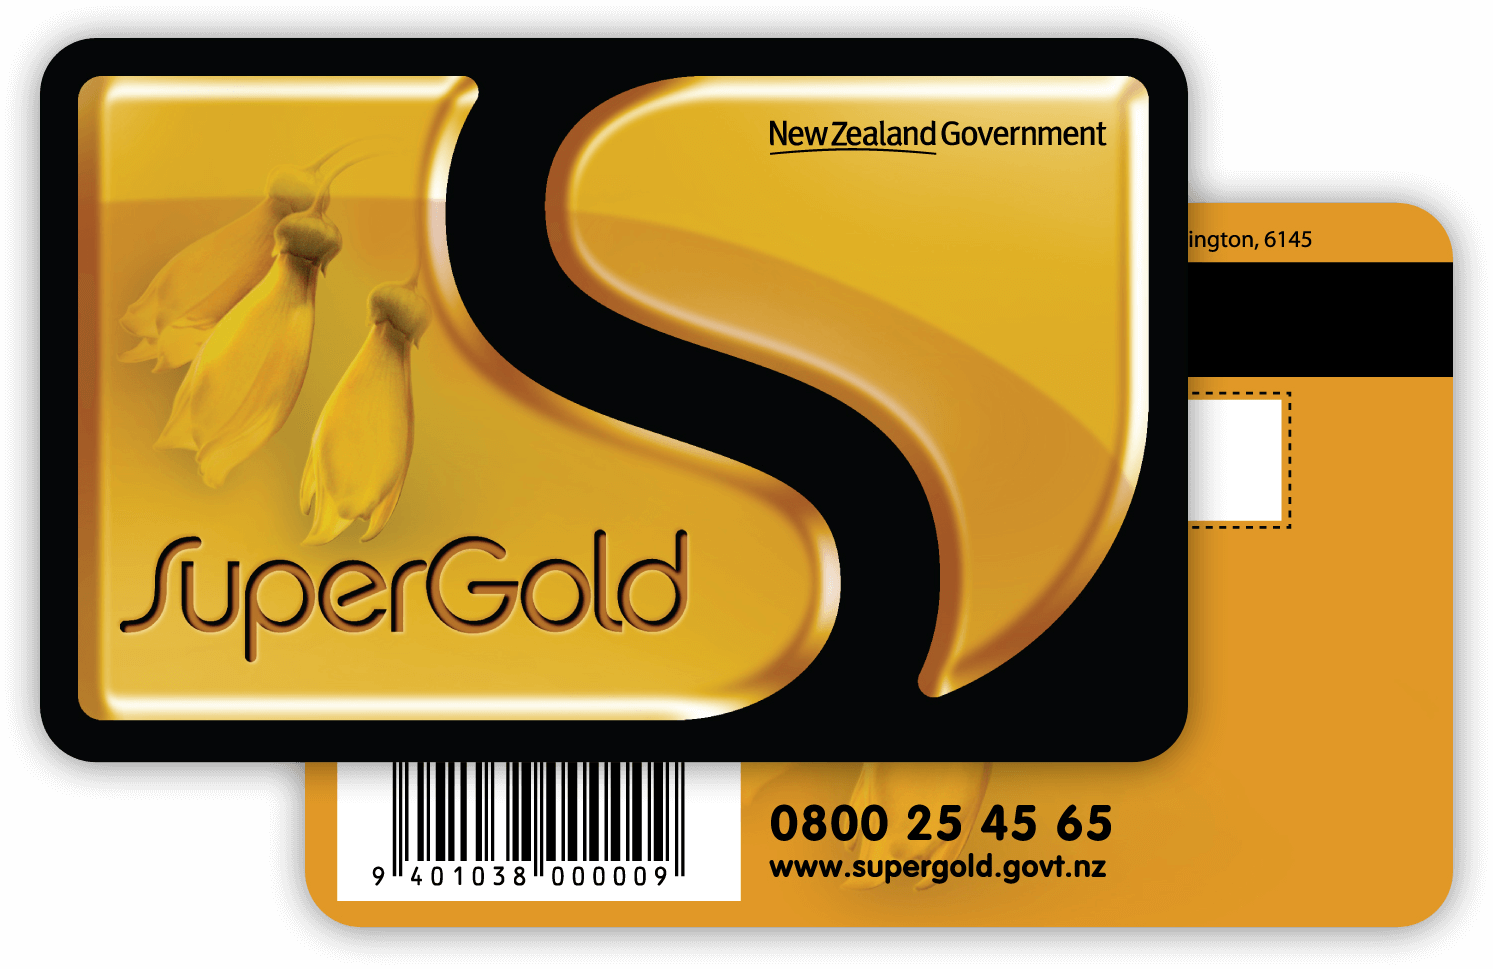 Heat and Cool Auckland offer a 5% discount on heat pumps and services to Gold Card Holders in Auckland 